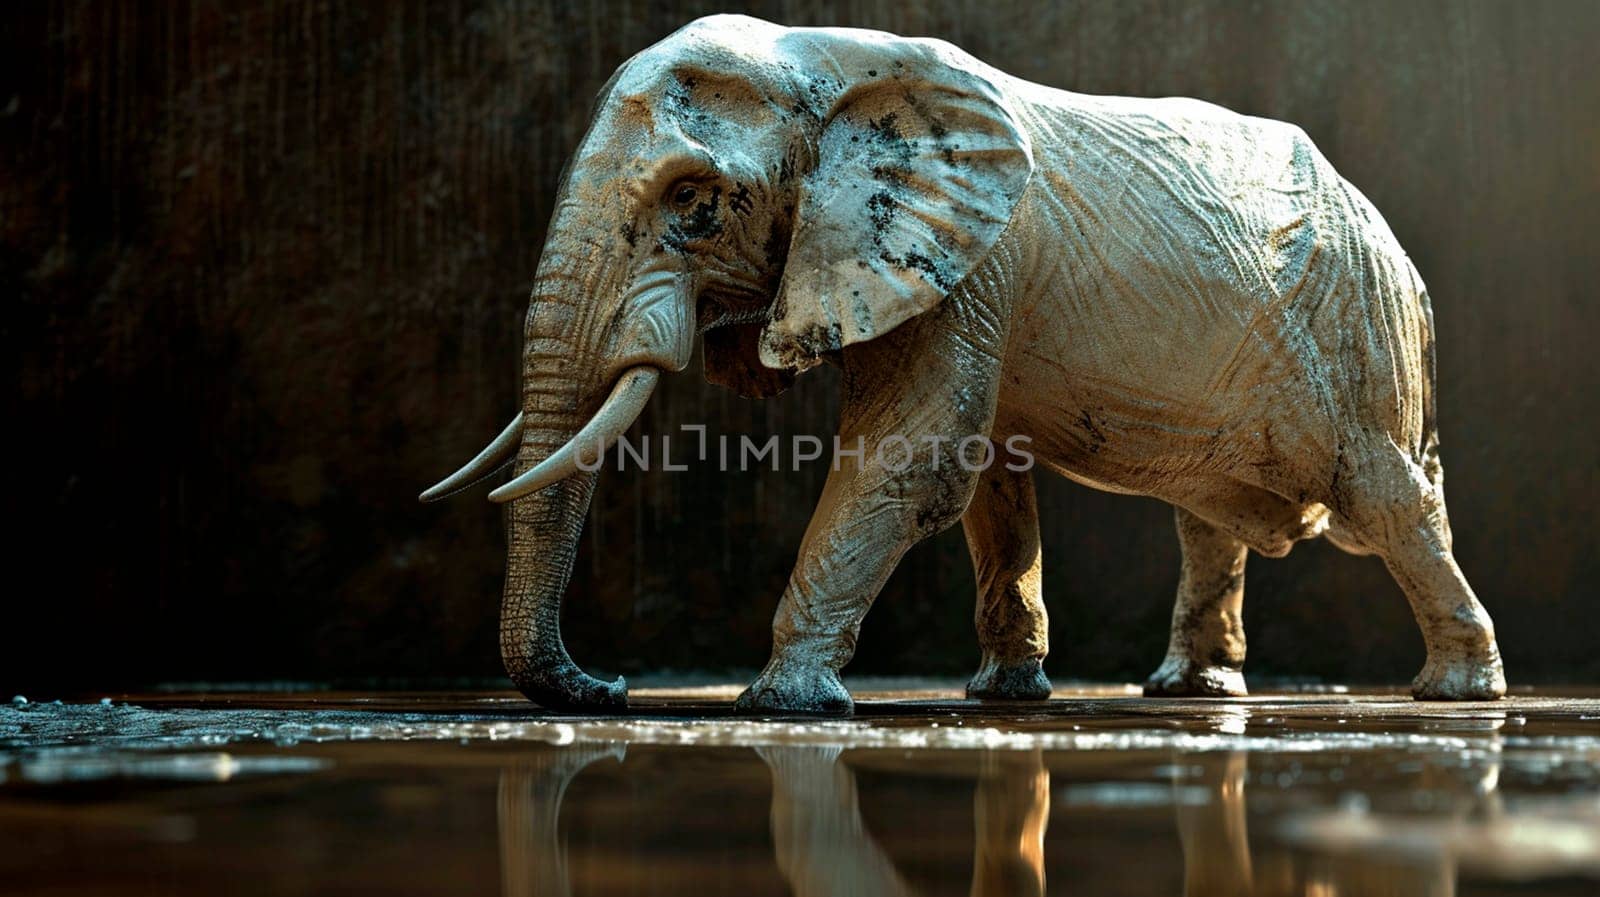 Indian elephant in nature. Selective focus. by yanadjana